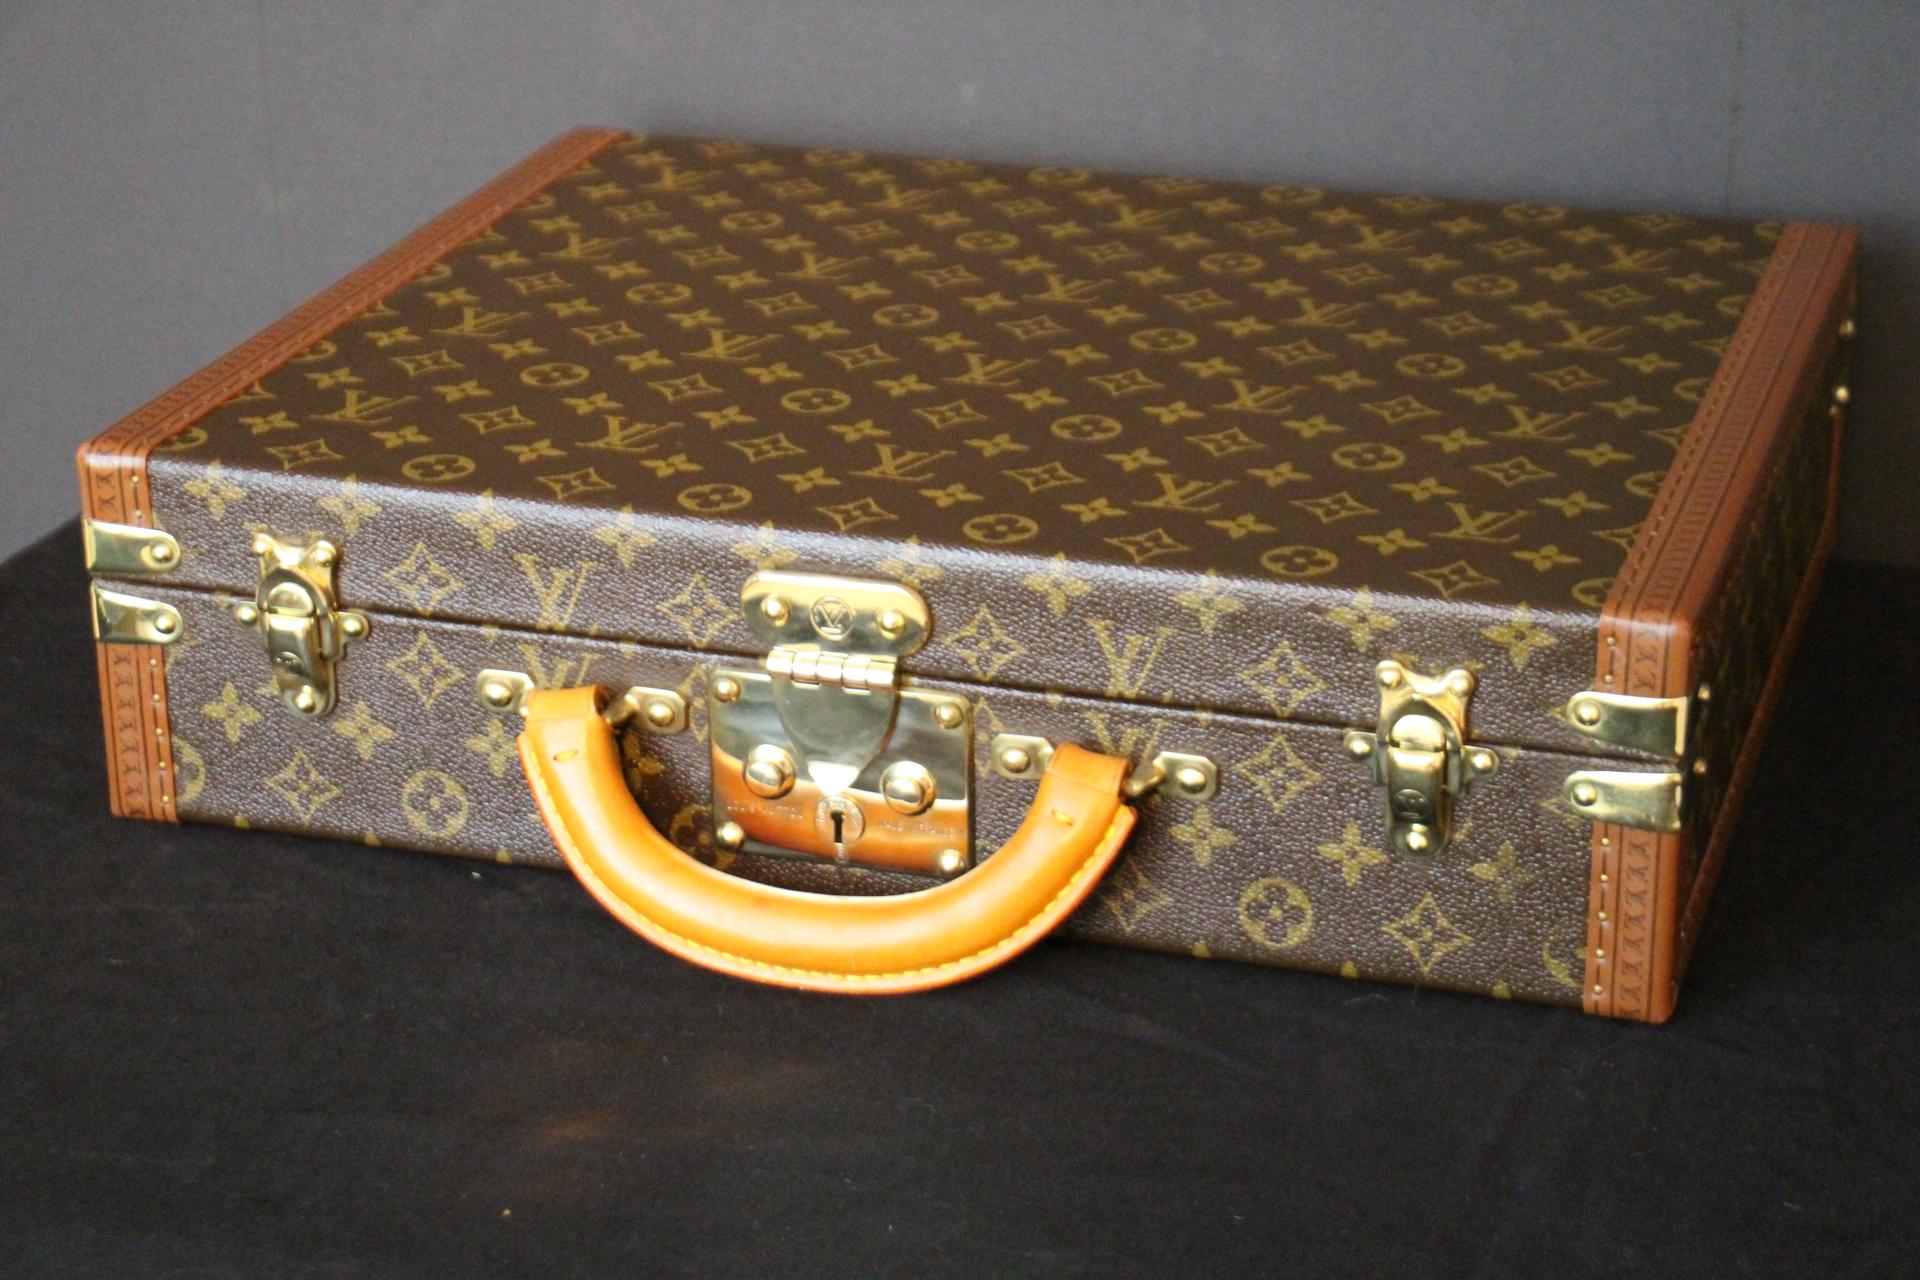 This elegant Louis Vuitton briefcase features monogram canvas and a comfortable all leather handle. Closed by a solid brass lock, it is accompanied by two crafted brass latches. Its trims are printed with the Louis Vuitton logo all around and are in